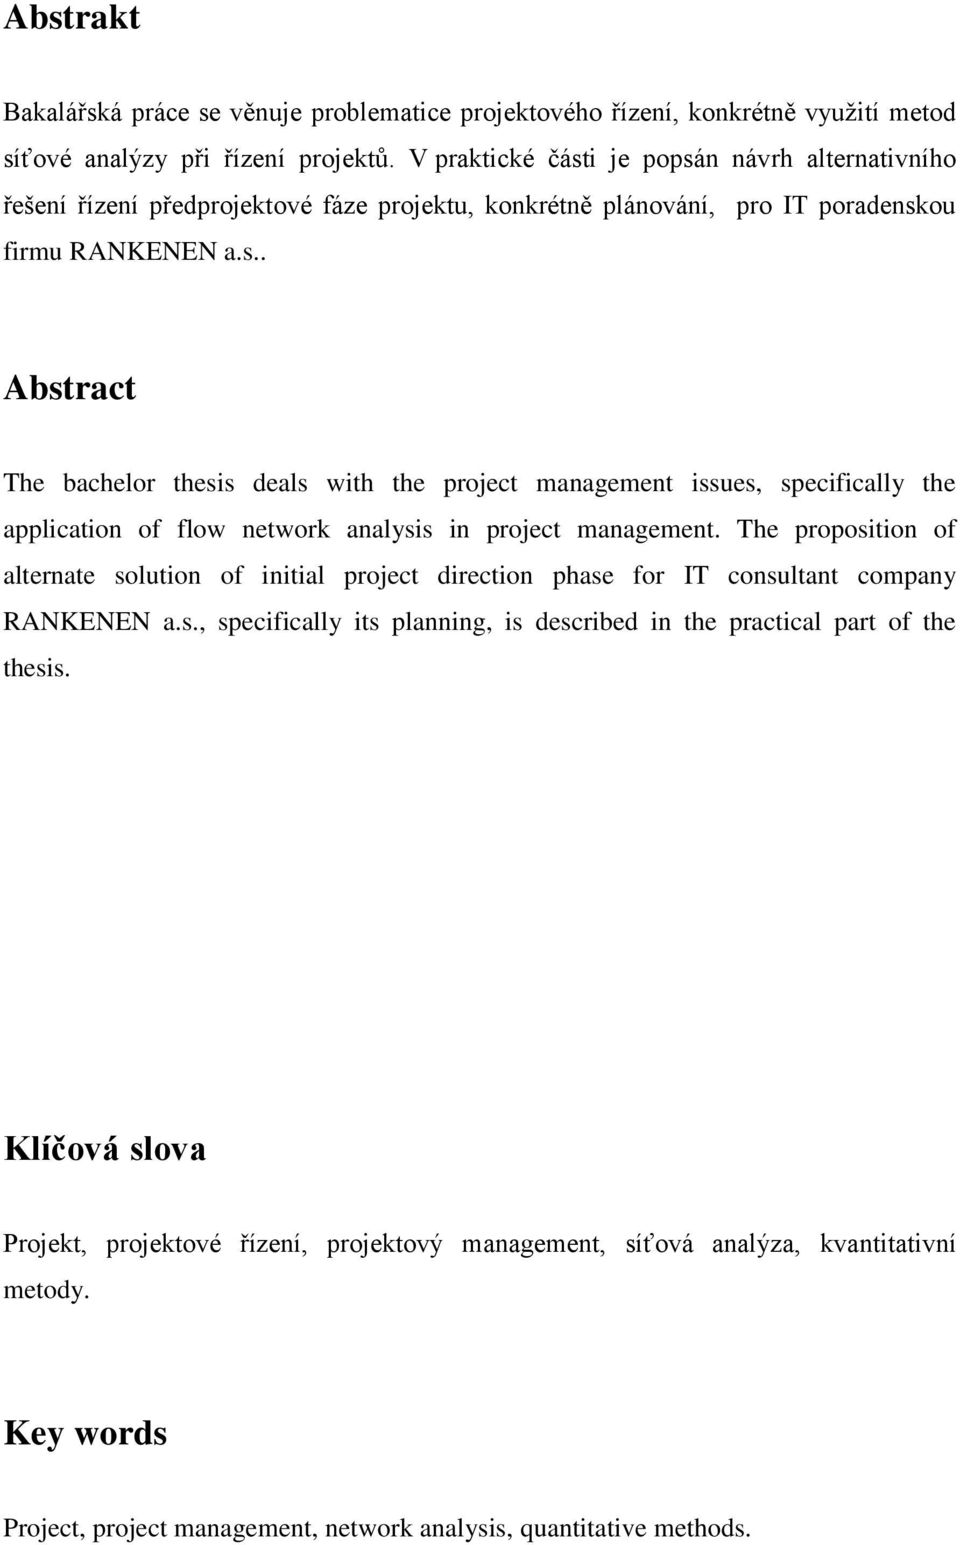 The proposition of alternate solution of initial project direction phase for IT consultant company RANKENEN a.s., specifically its planning, is described in the practical part of the thesis.